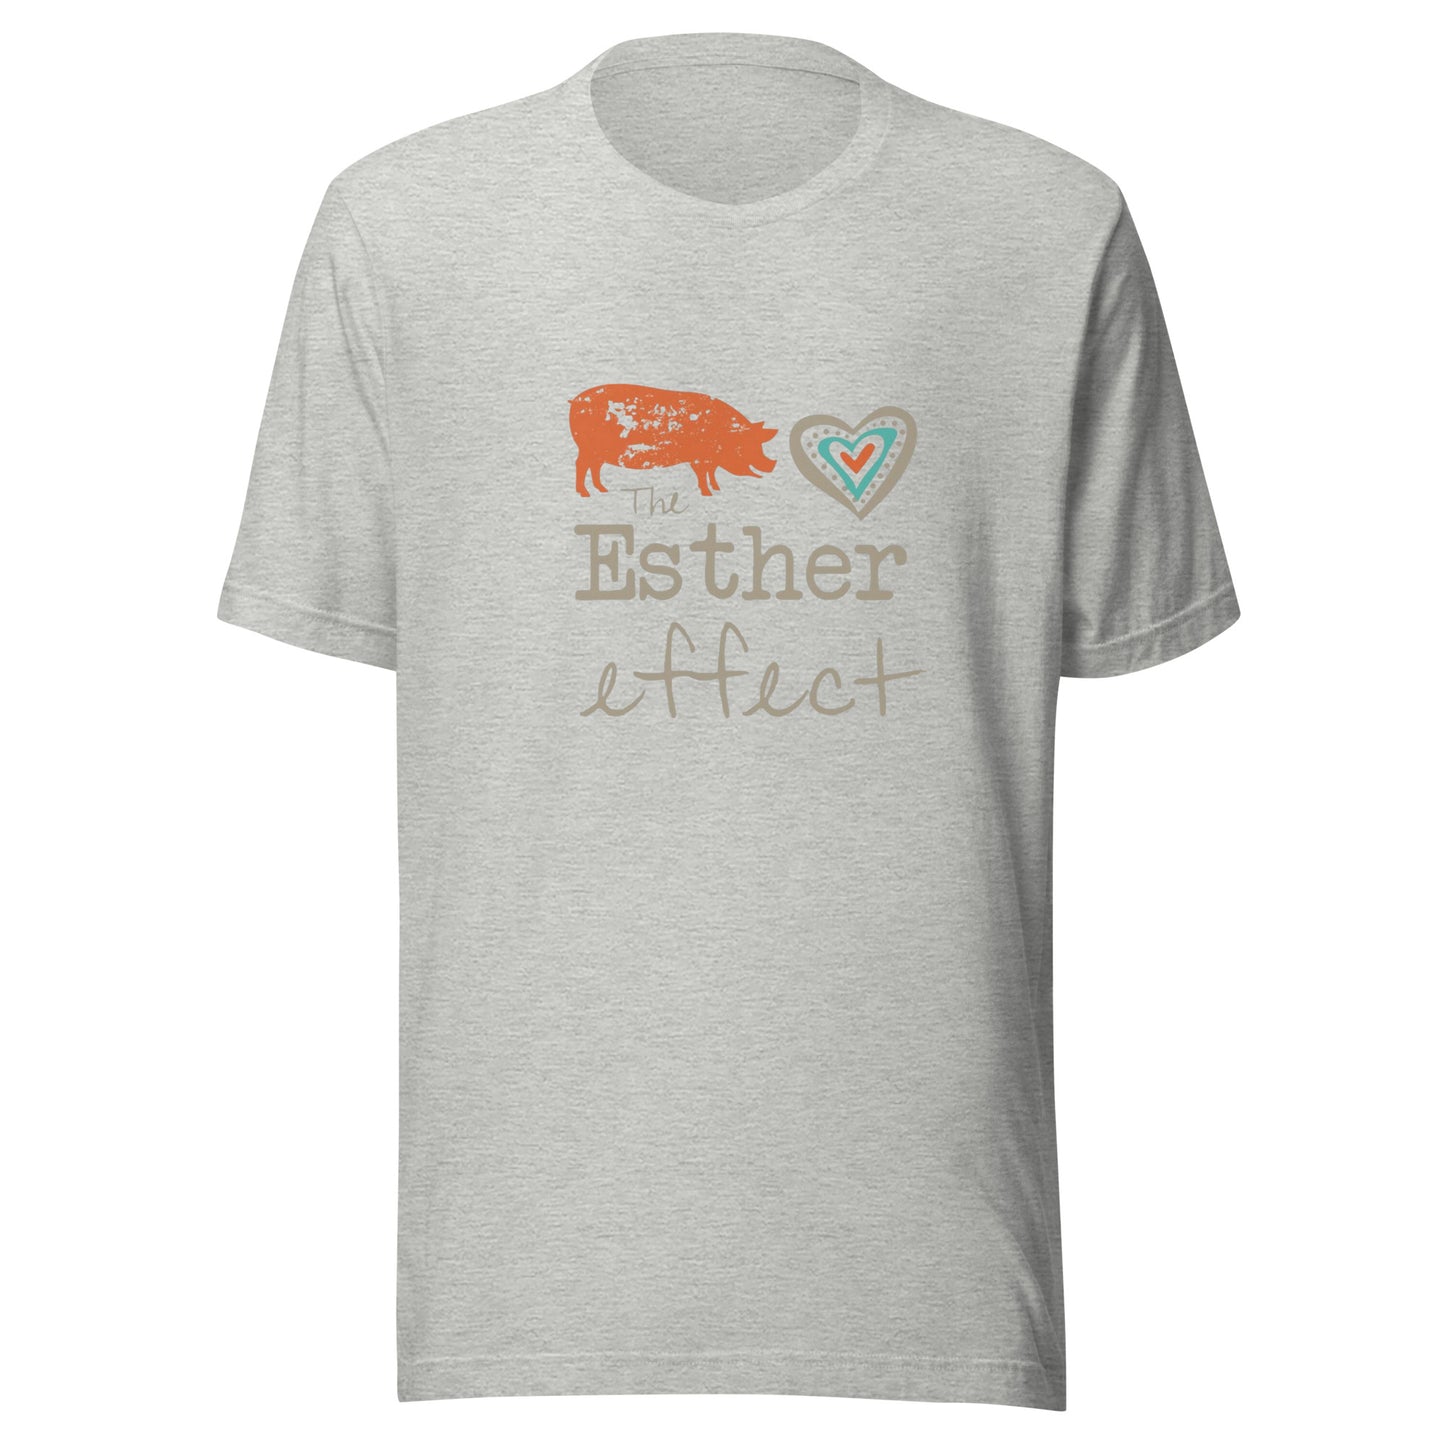 NEW- TEE- The Esther Effect -Unisex tshirt